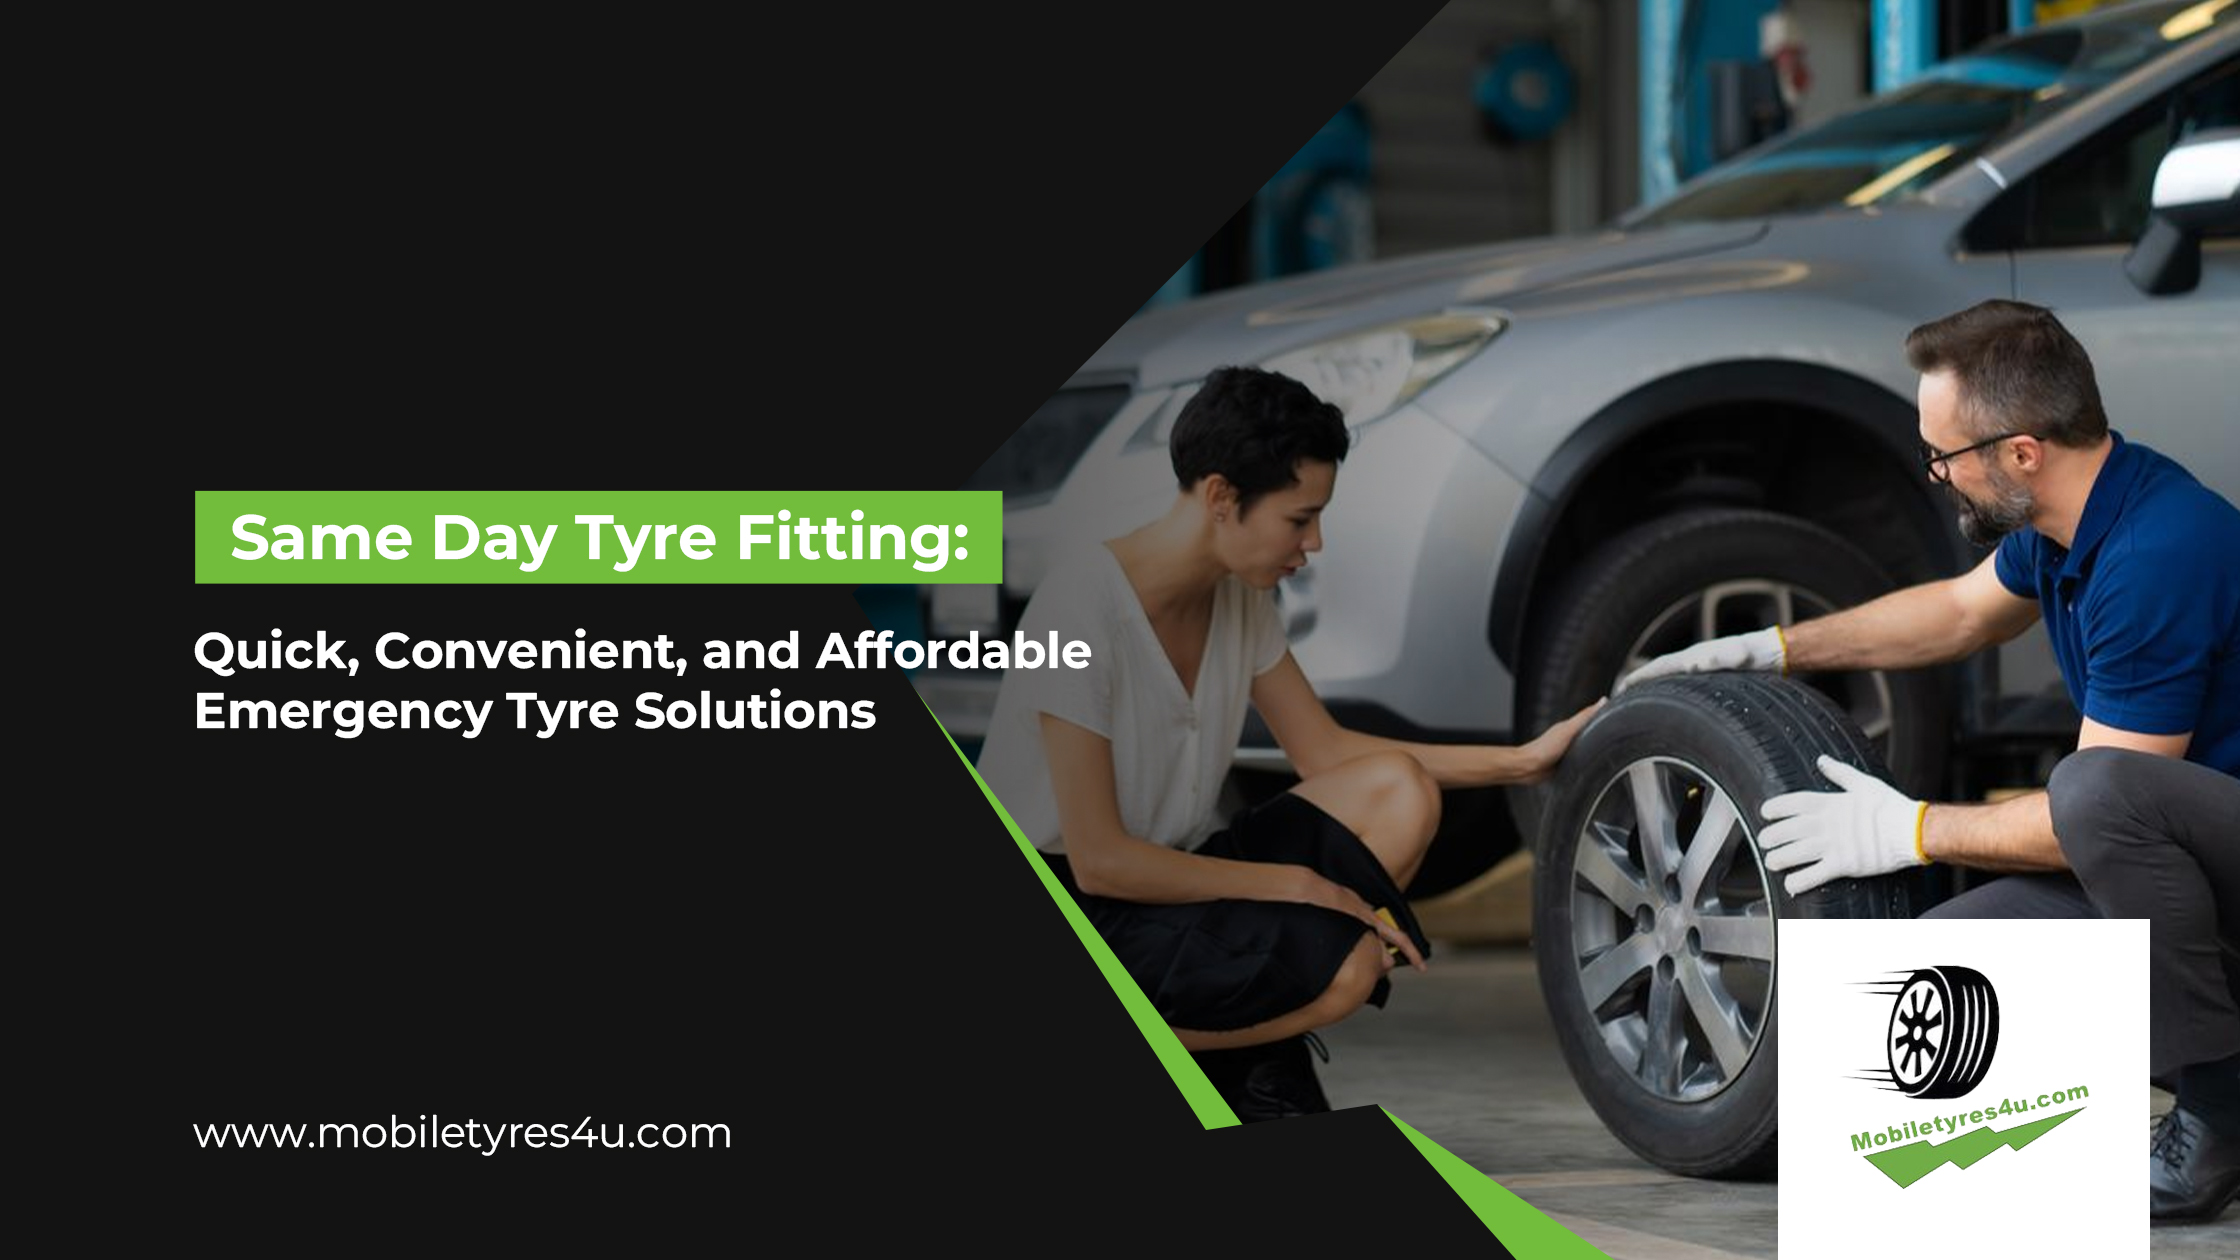 Blog_The Benefits of Same Day Tyre Fitting for Emergency Situations